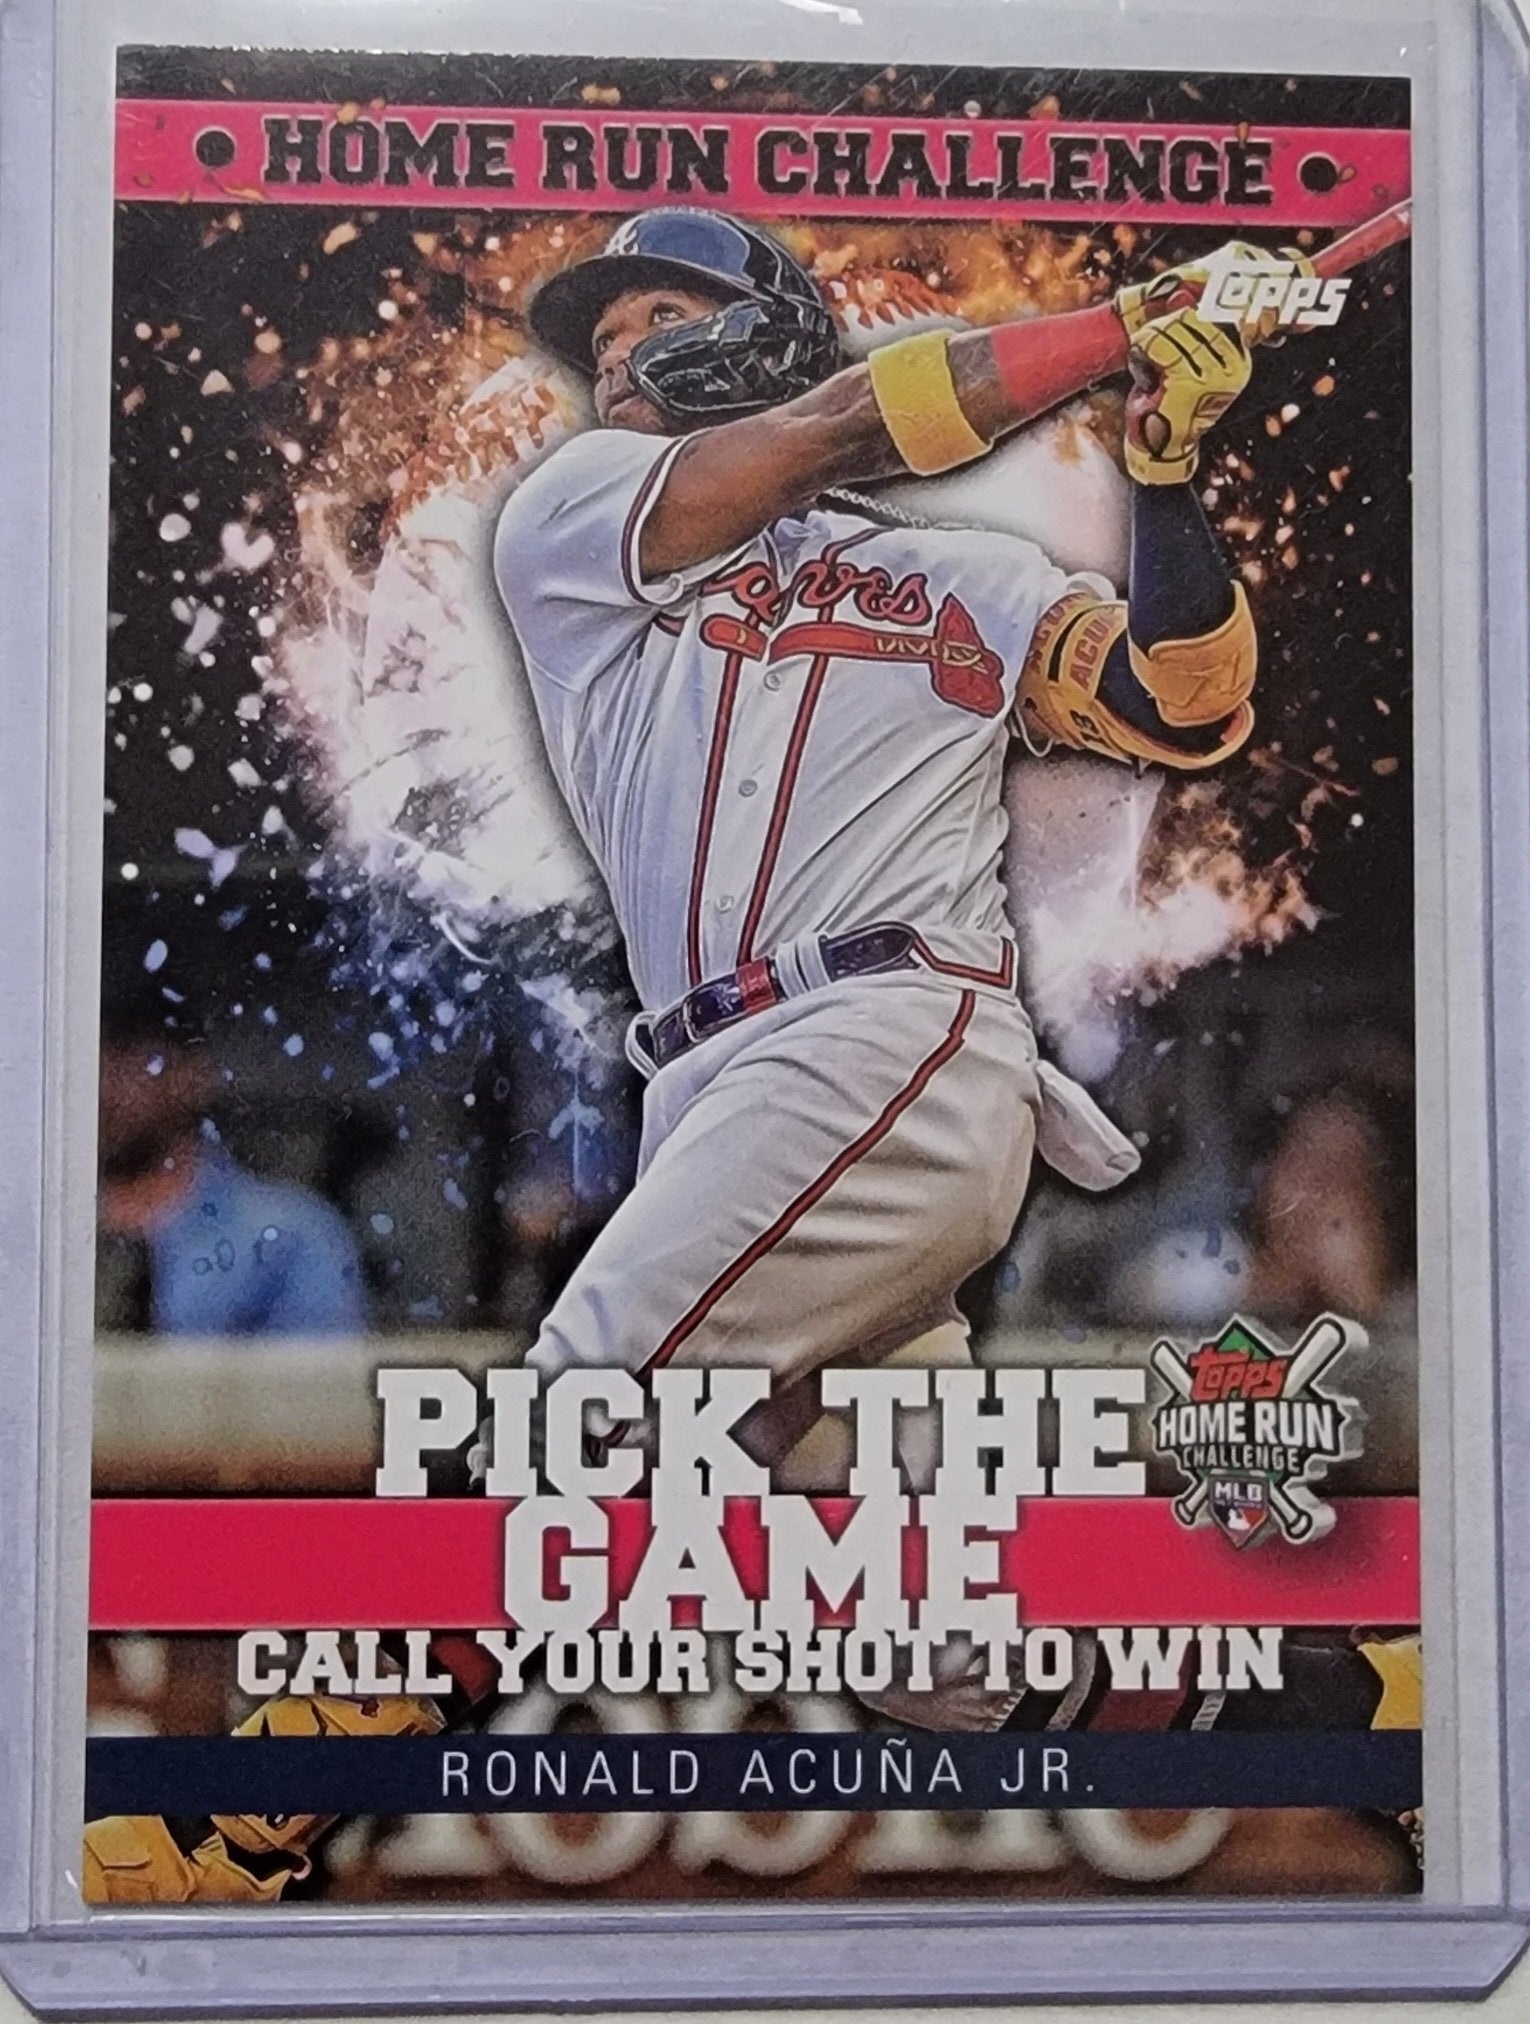 2022 Topps Series 2 Ronald Acuna Jr Pick the Game Unscratched Insert Baseball Card AVM1 simple Xclusive Collectibles   